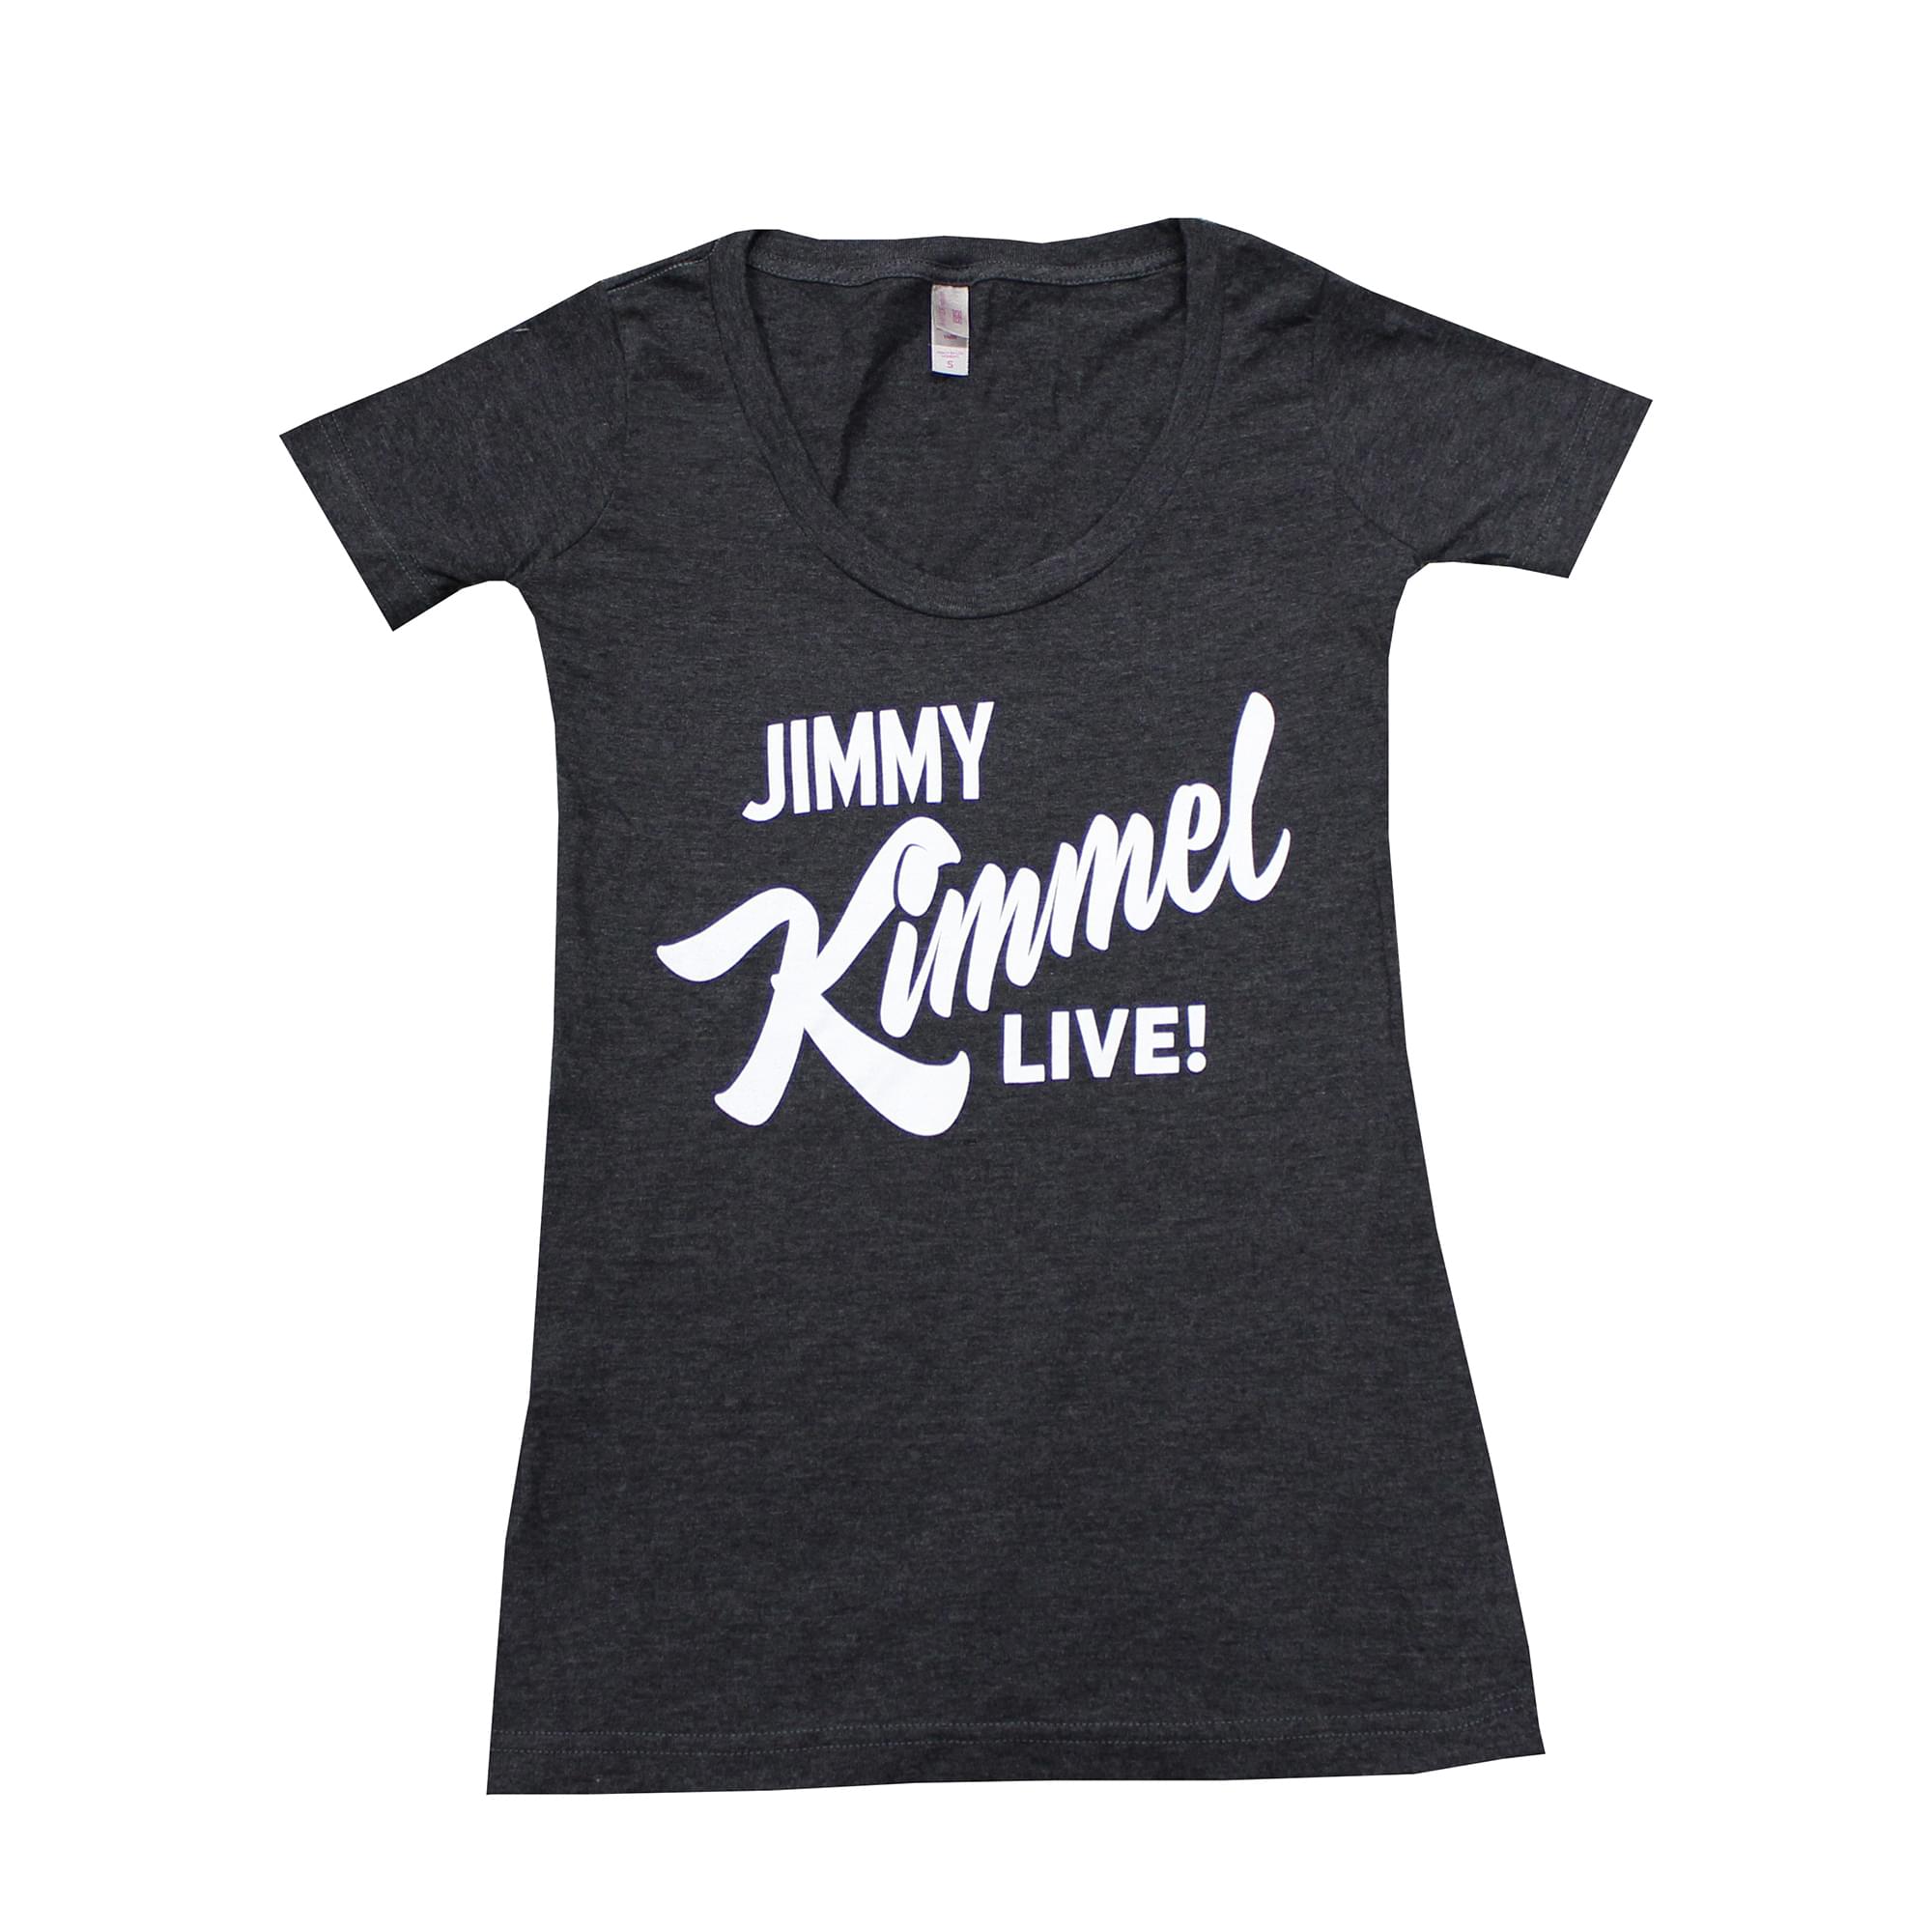 Jimmy Kimmel Live! Hollywood Heather Charcoal Scoop Neck Tee Shirt Adult